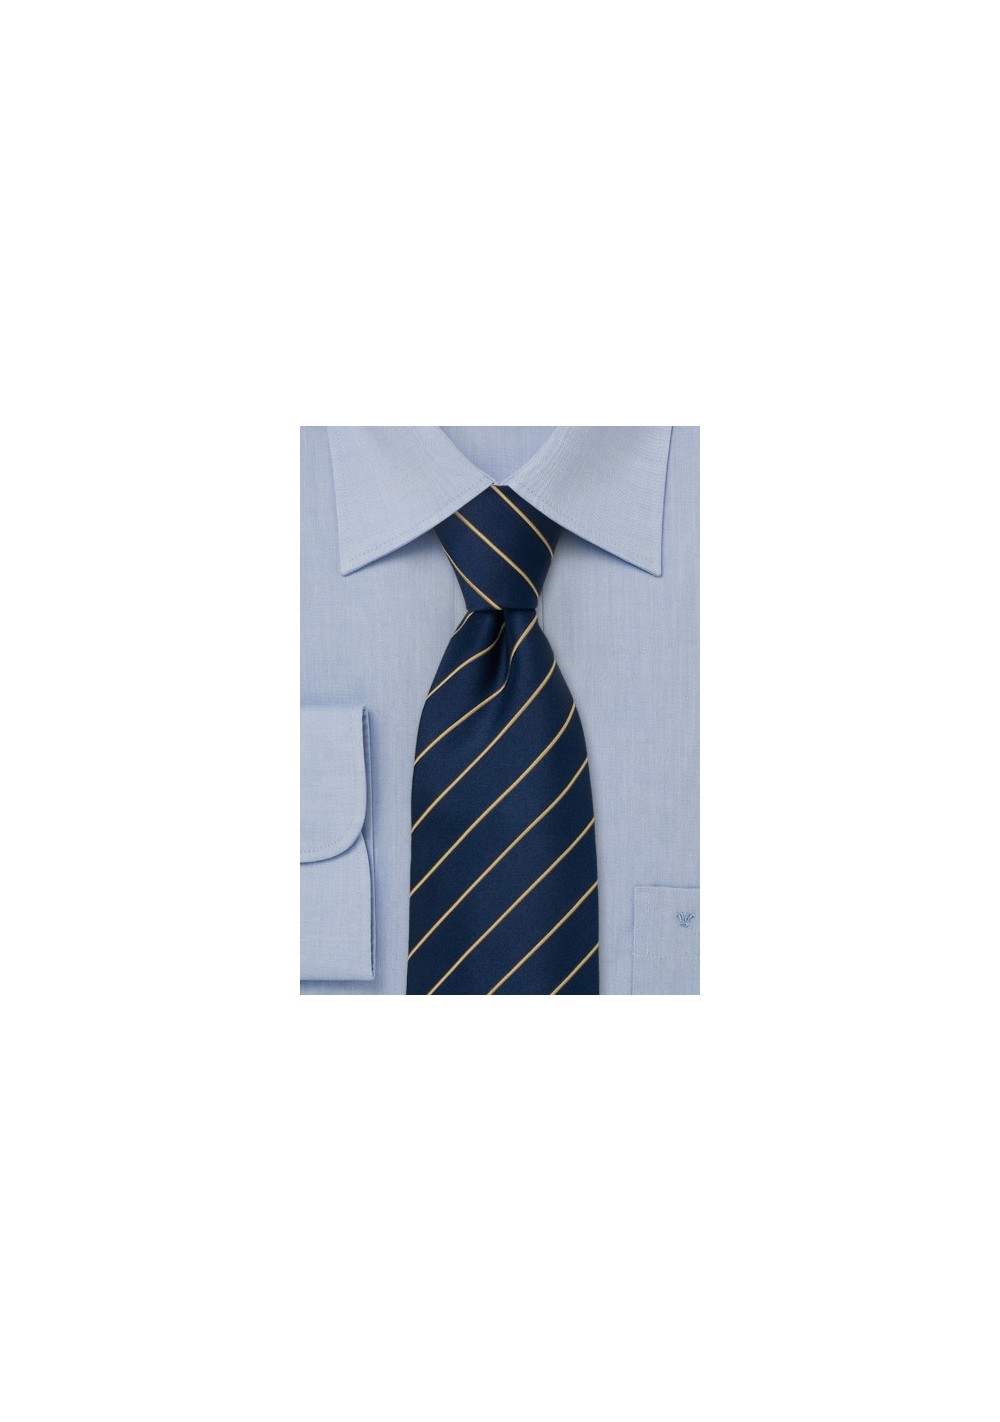 Business Tie - Blue with fine yellow stripes